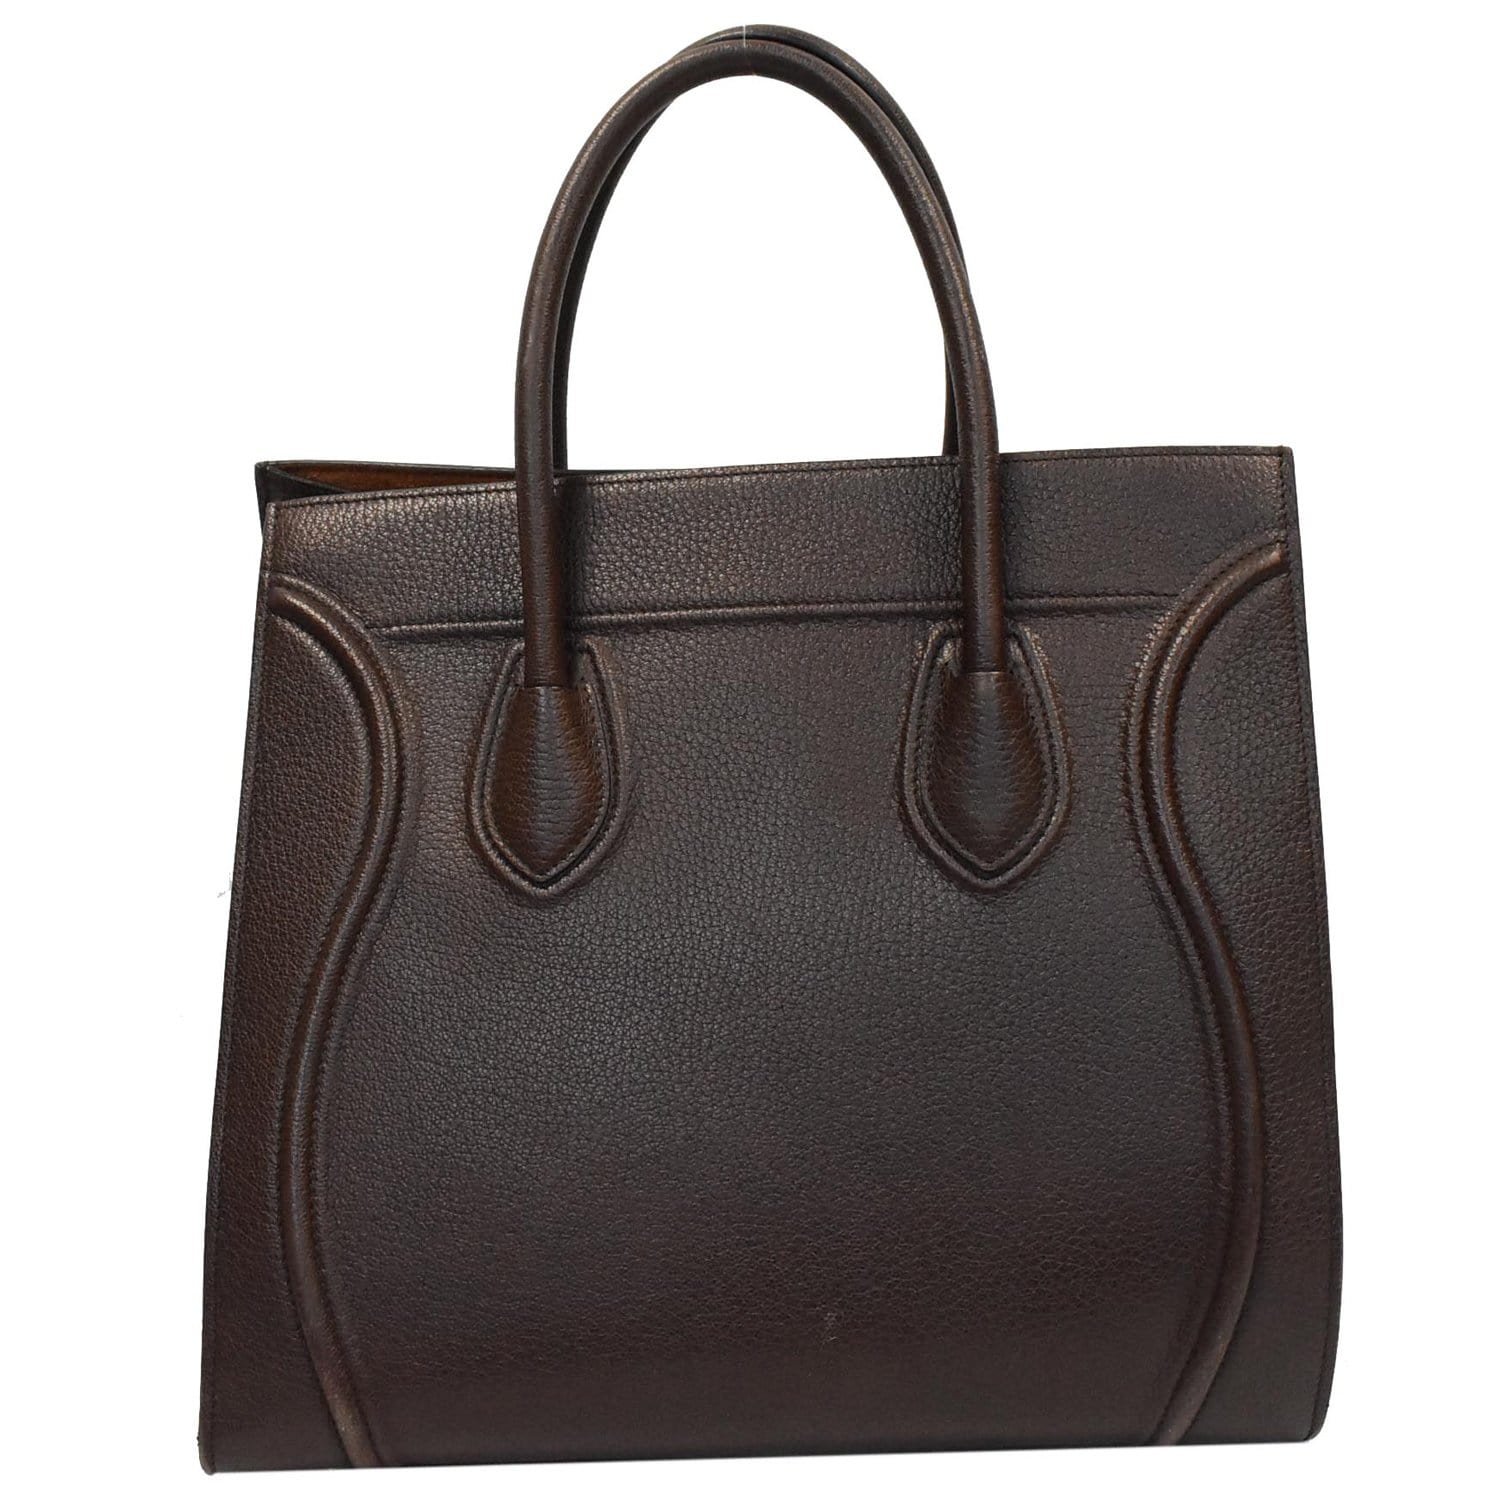 Celine Pre-owned Women's Leather Handbag - Brown - One Size